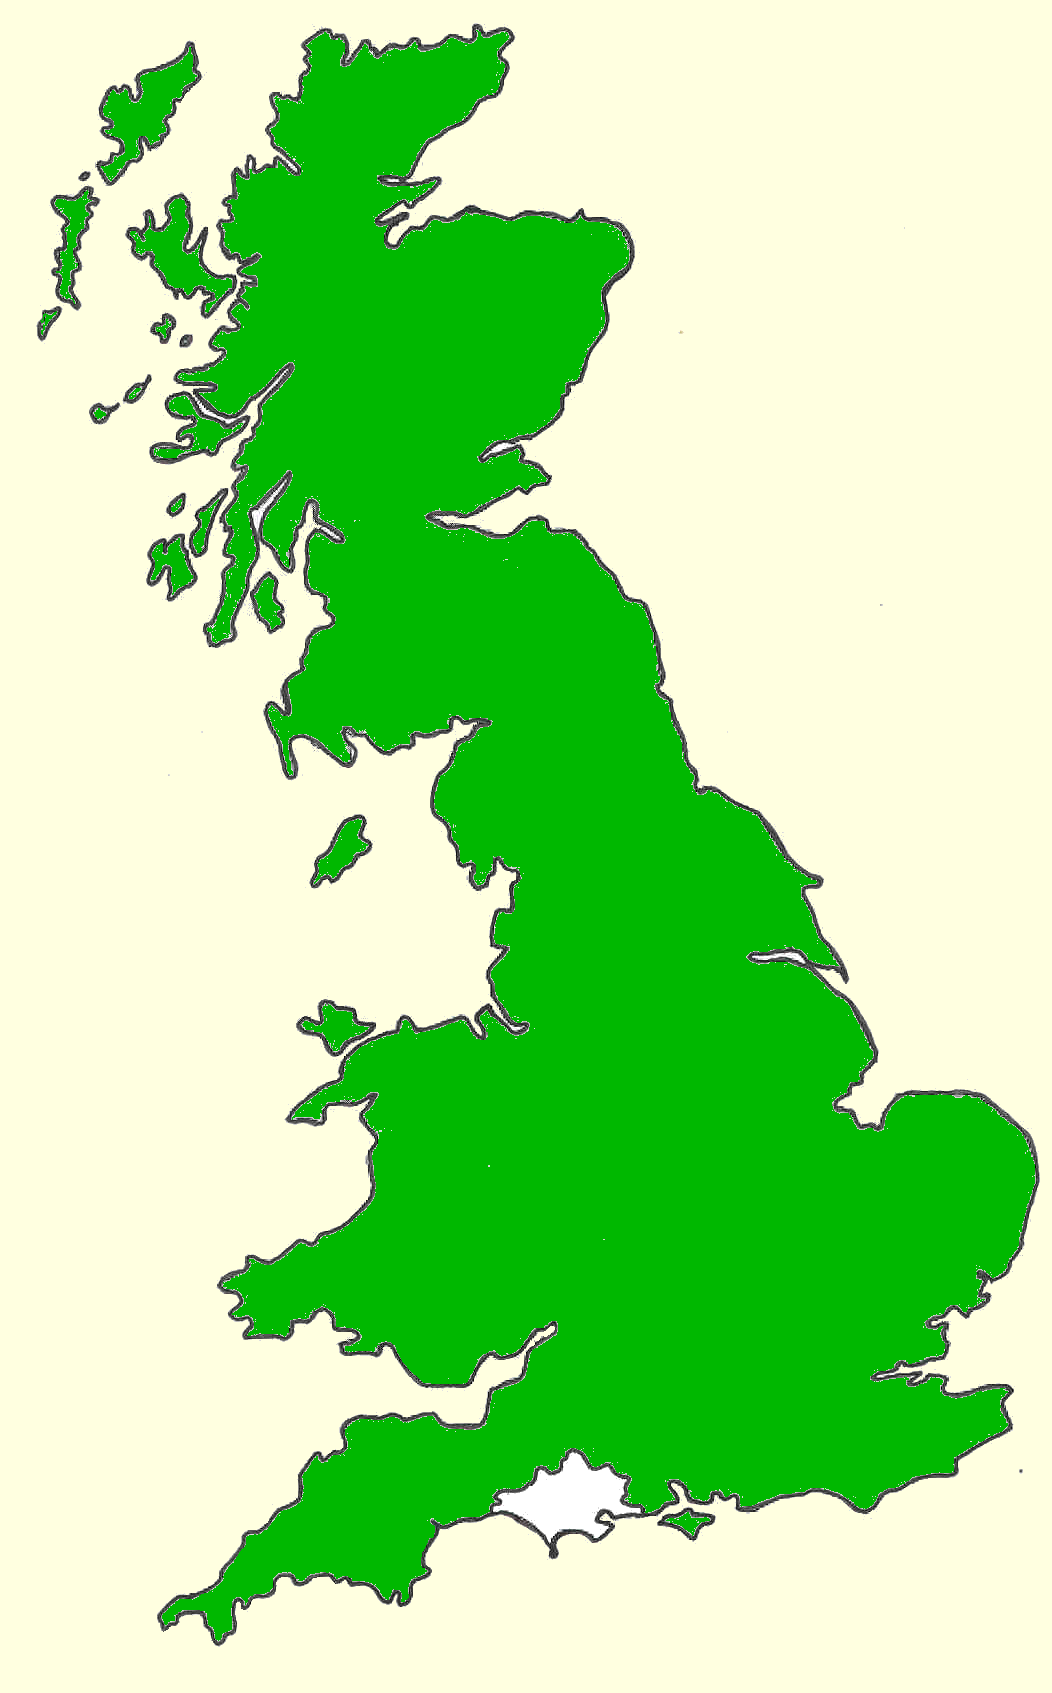 Outline map of mainland Britain, Dorset county highlighted